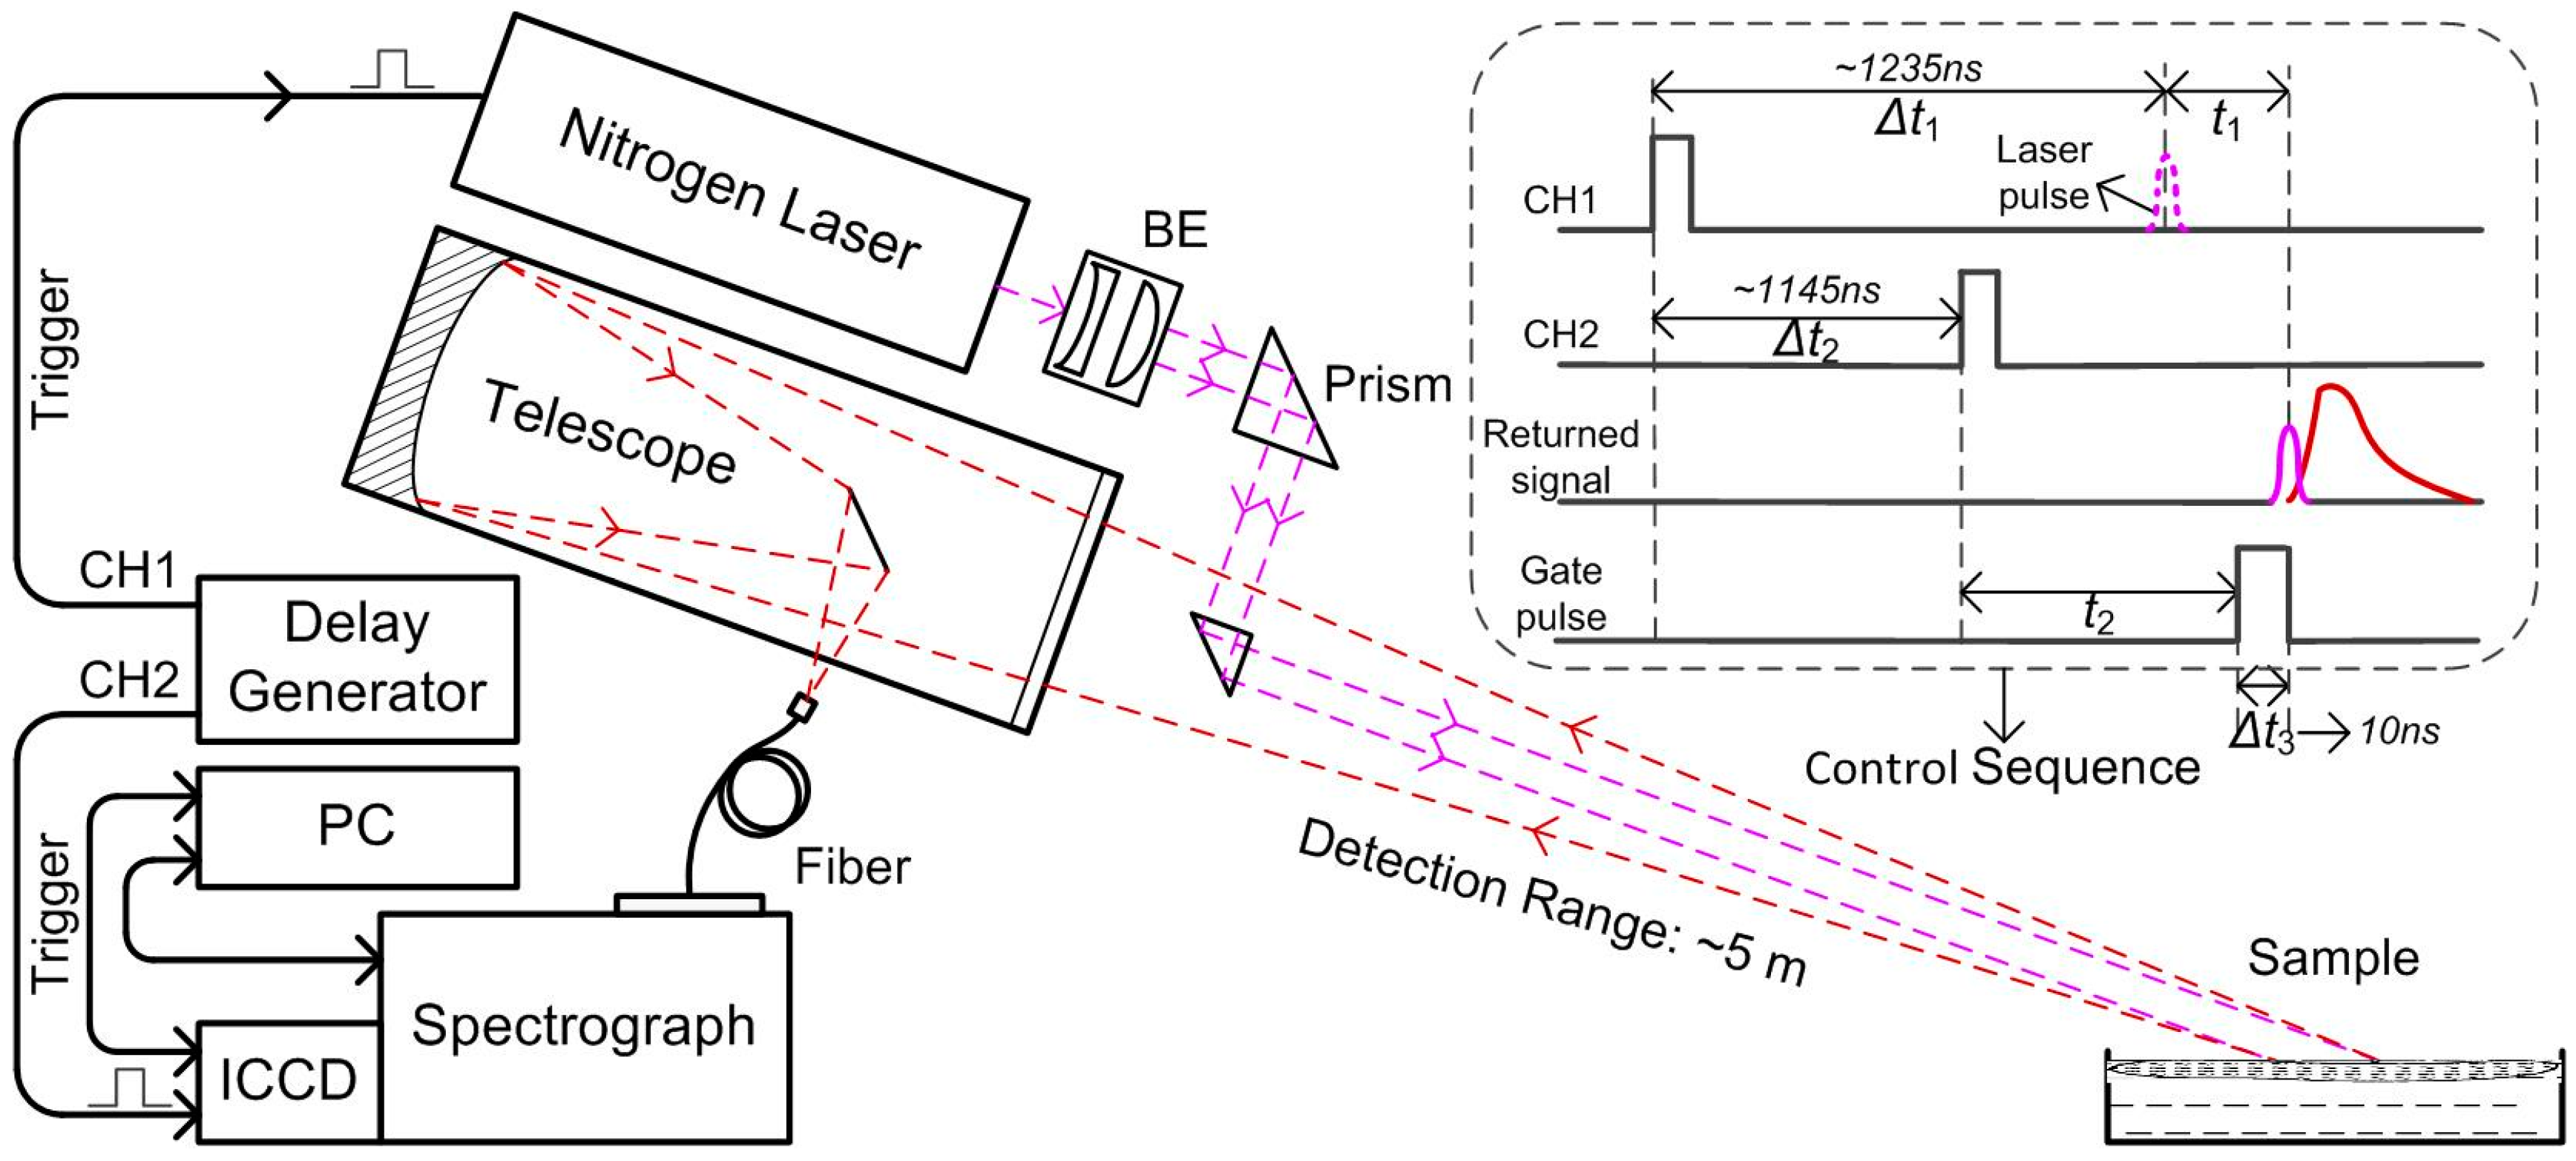 Sensors | Free Full-Text | A New Approach of Oil Spill Detection Using  Time-Resolved LIF Combined with Parallel Factors Analysis for Laser Remote  Sensing